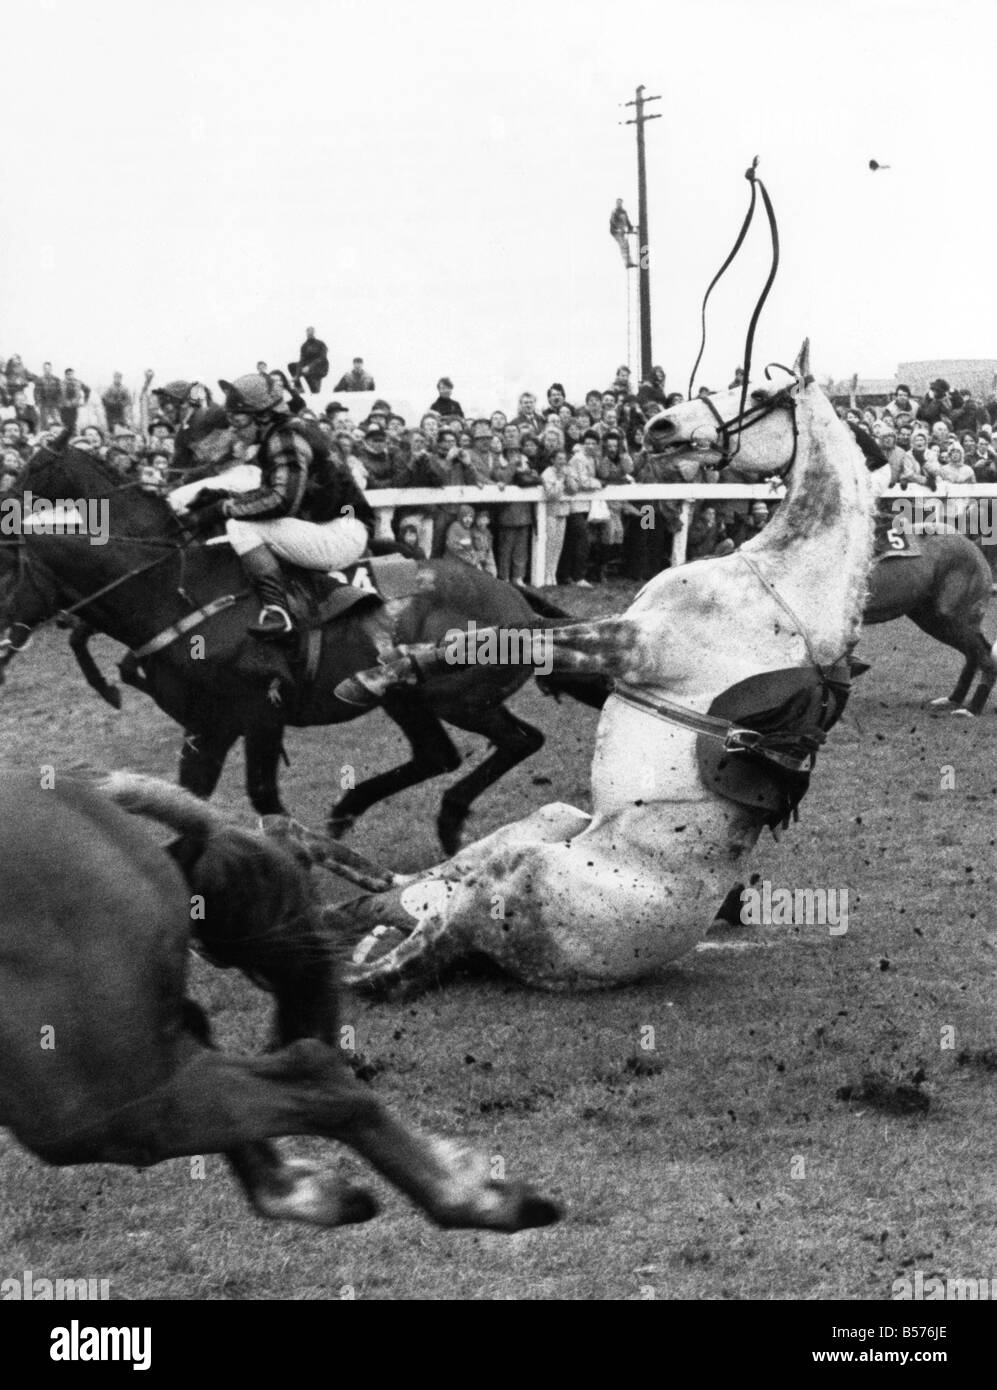 1987 Grand National: The 1987 Seagram Grand National, run at Aintree , 4th April, was won by Maori Venture ridden by Steve Knight. The race produced its usual crop of falls and one horse, Dark Ivy, died when it fell and broke its neck at Becher's Brook on the first circuit. Dark Ivy struggles to rise after its fall at Becher's Brook. April 1987 P004060 Stock Photo